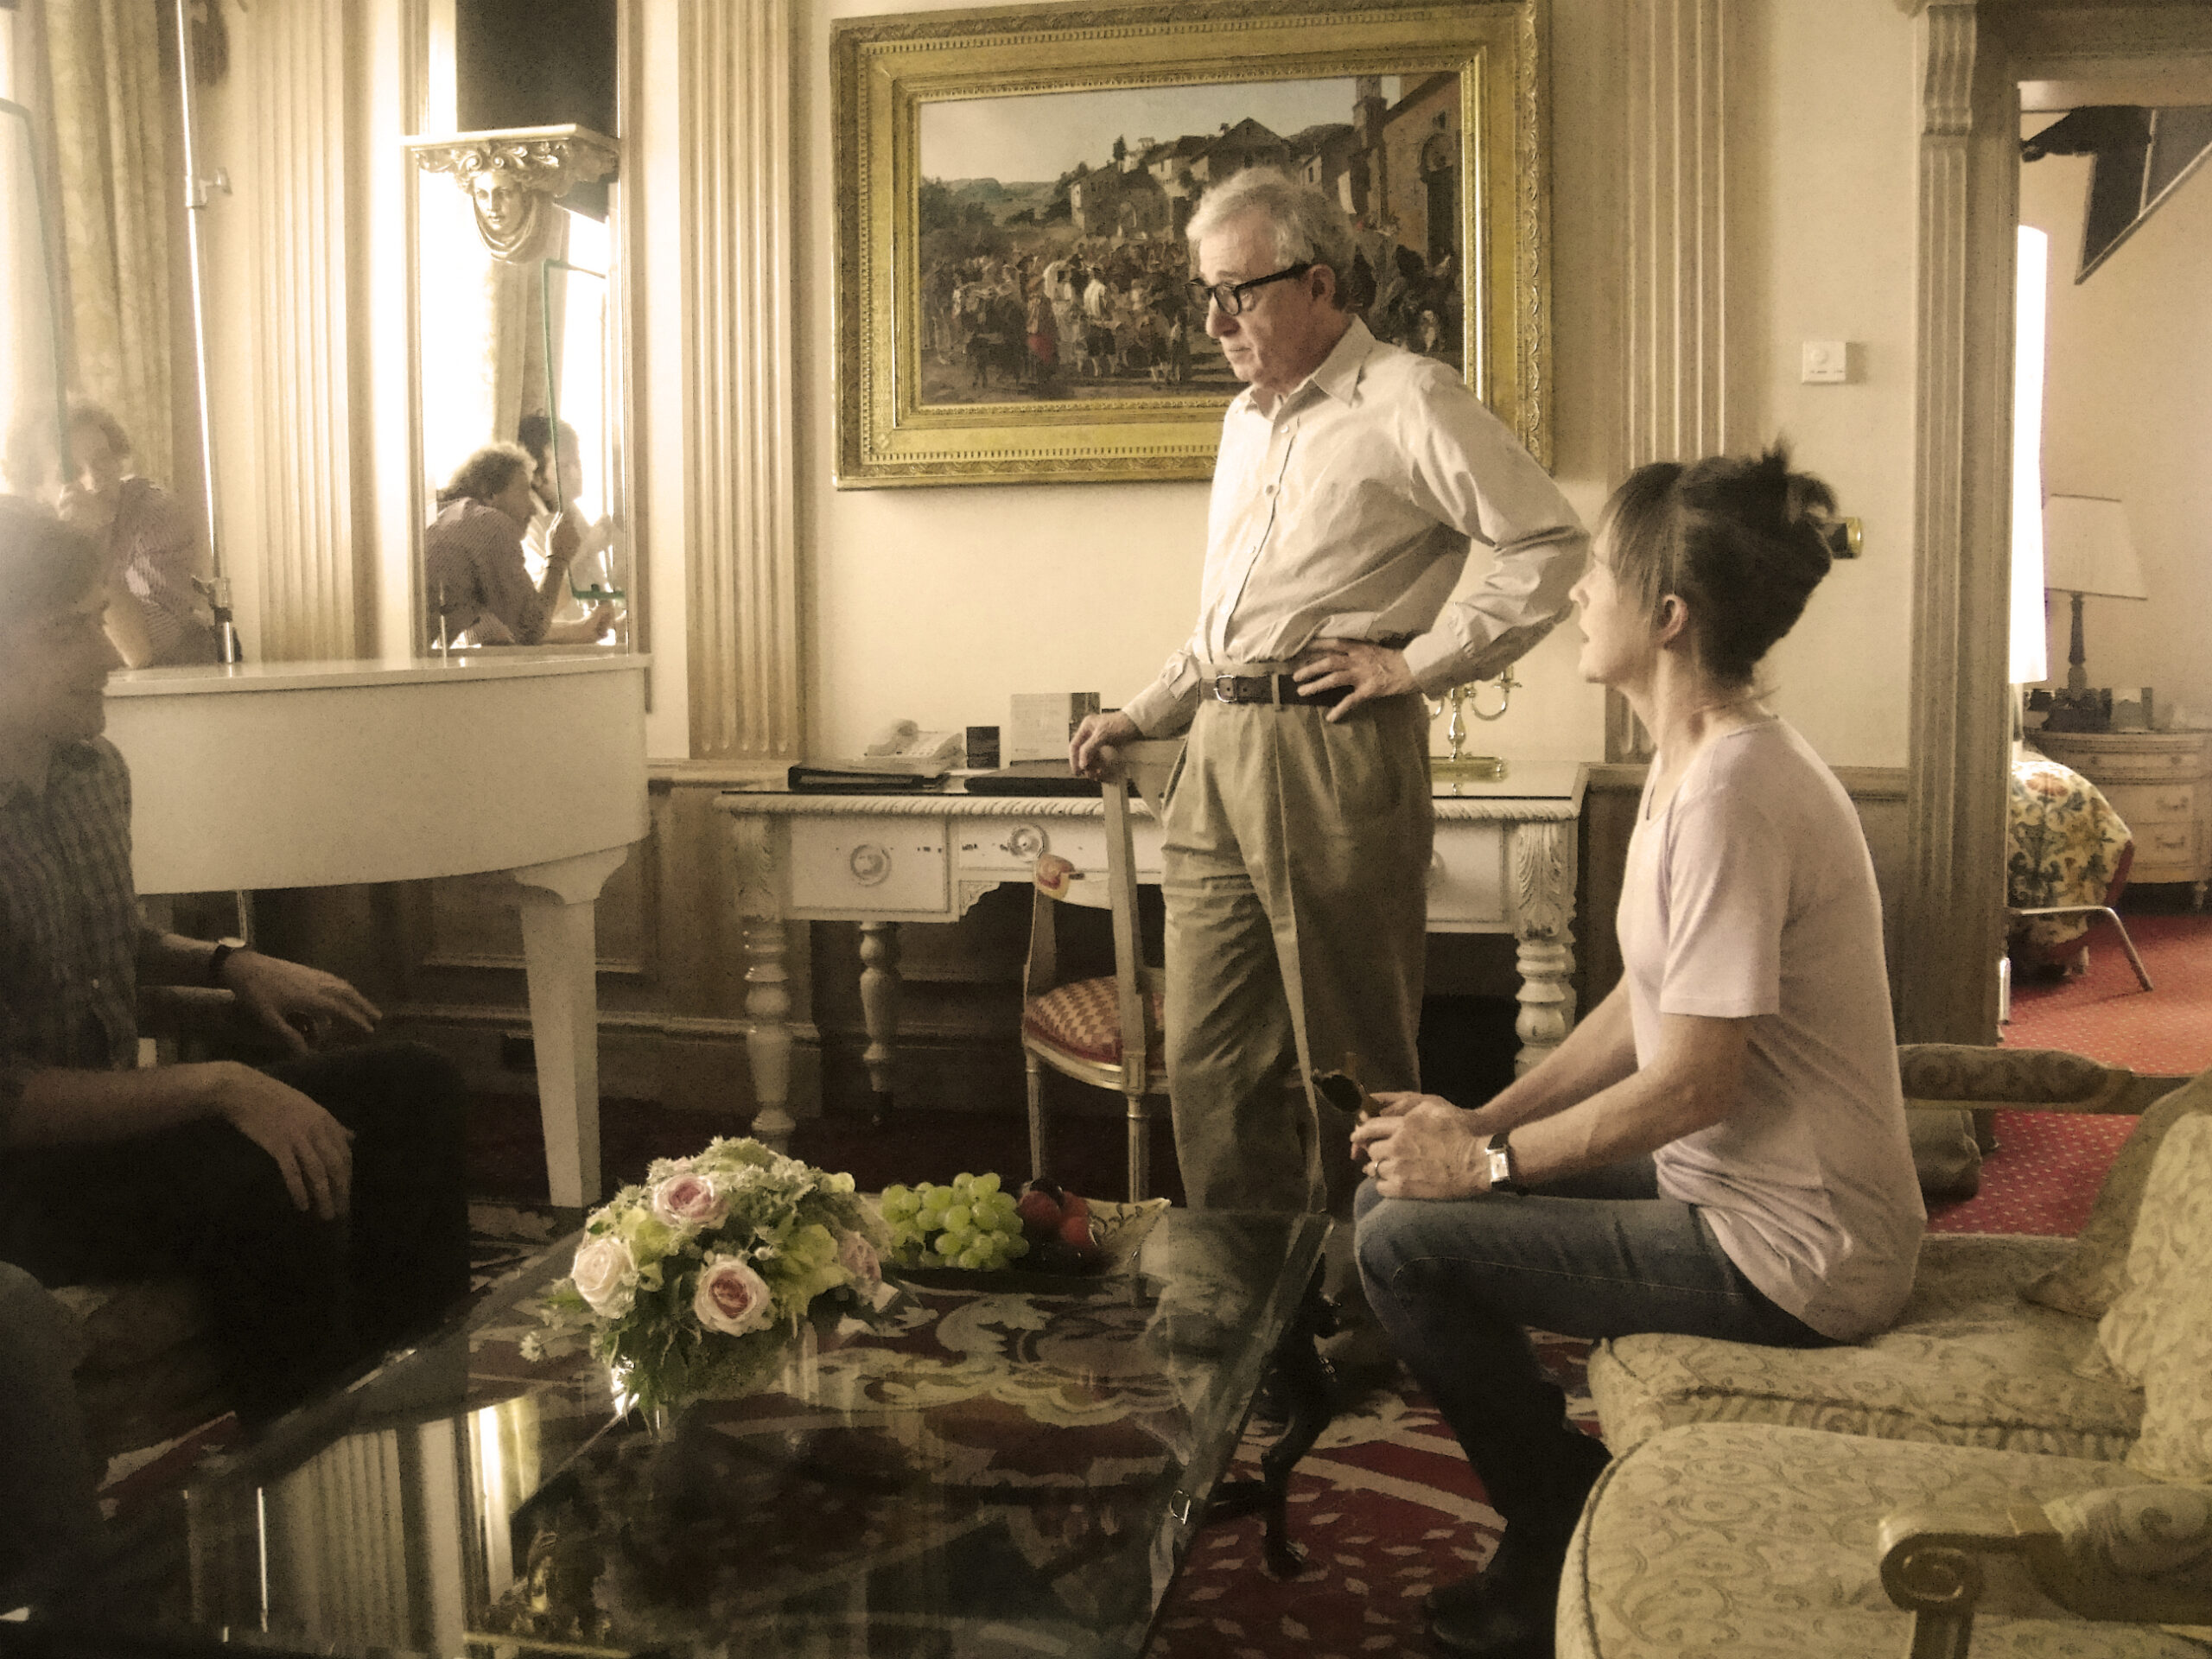 TO ROME WITH LOVE - Directed by Woody Allen - Int. Jerry’s Hotel Room - ©2012 - Sony Pictures